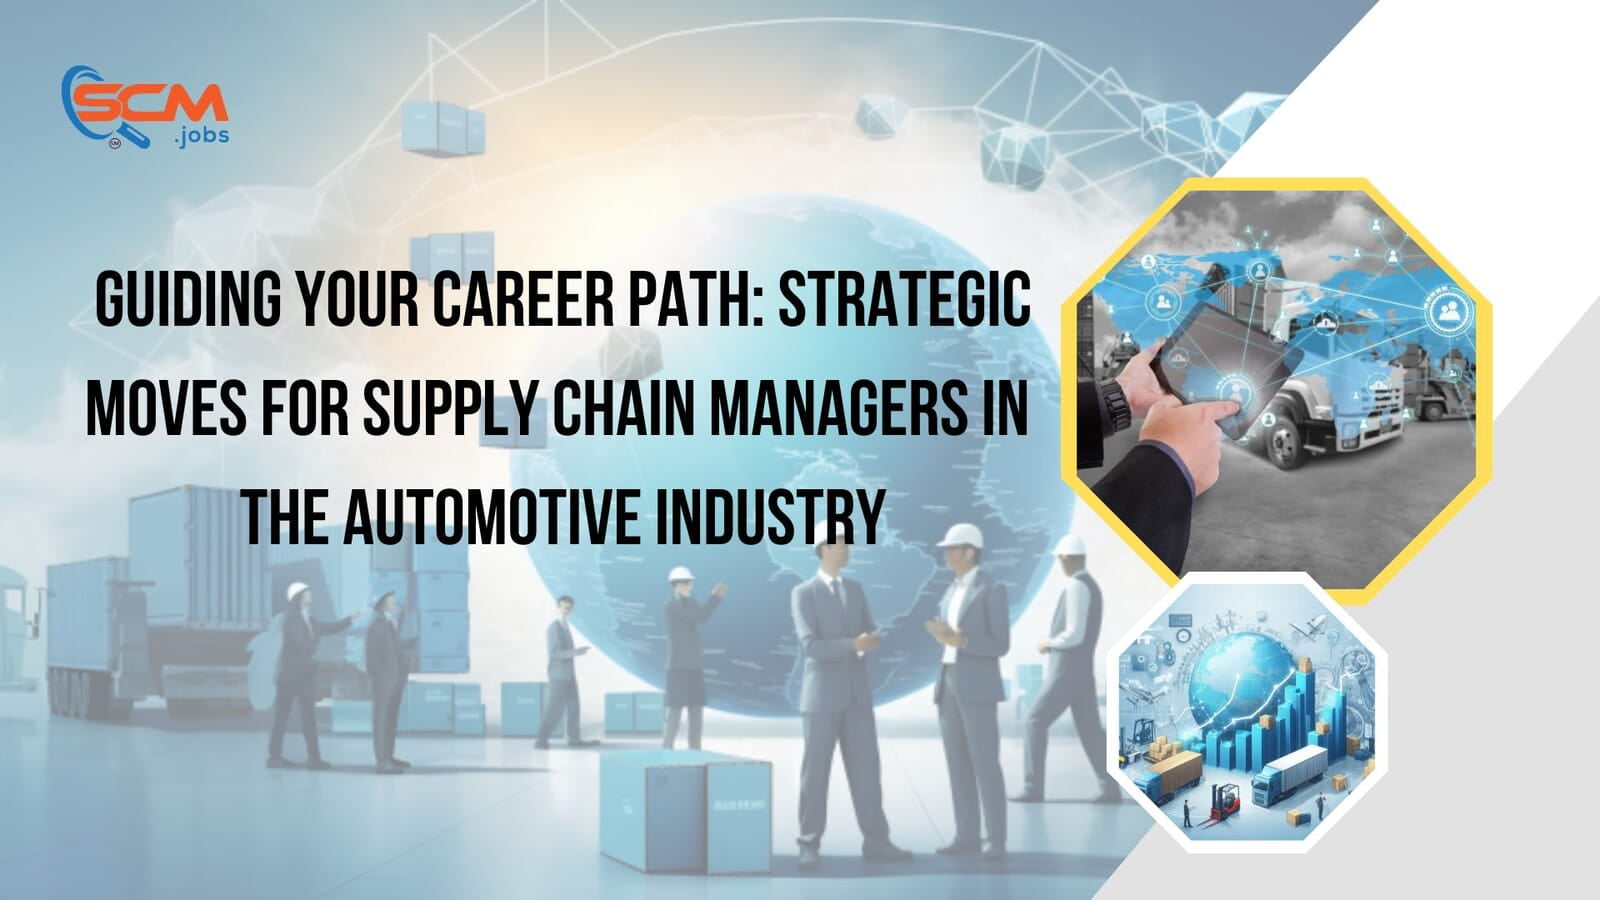 Guiding Your Career Path: Strategic Moves for Supply Chain Managers in the Automotive Industry